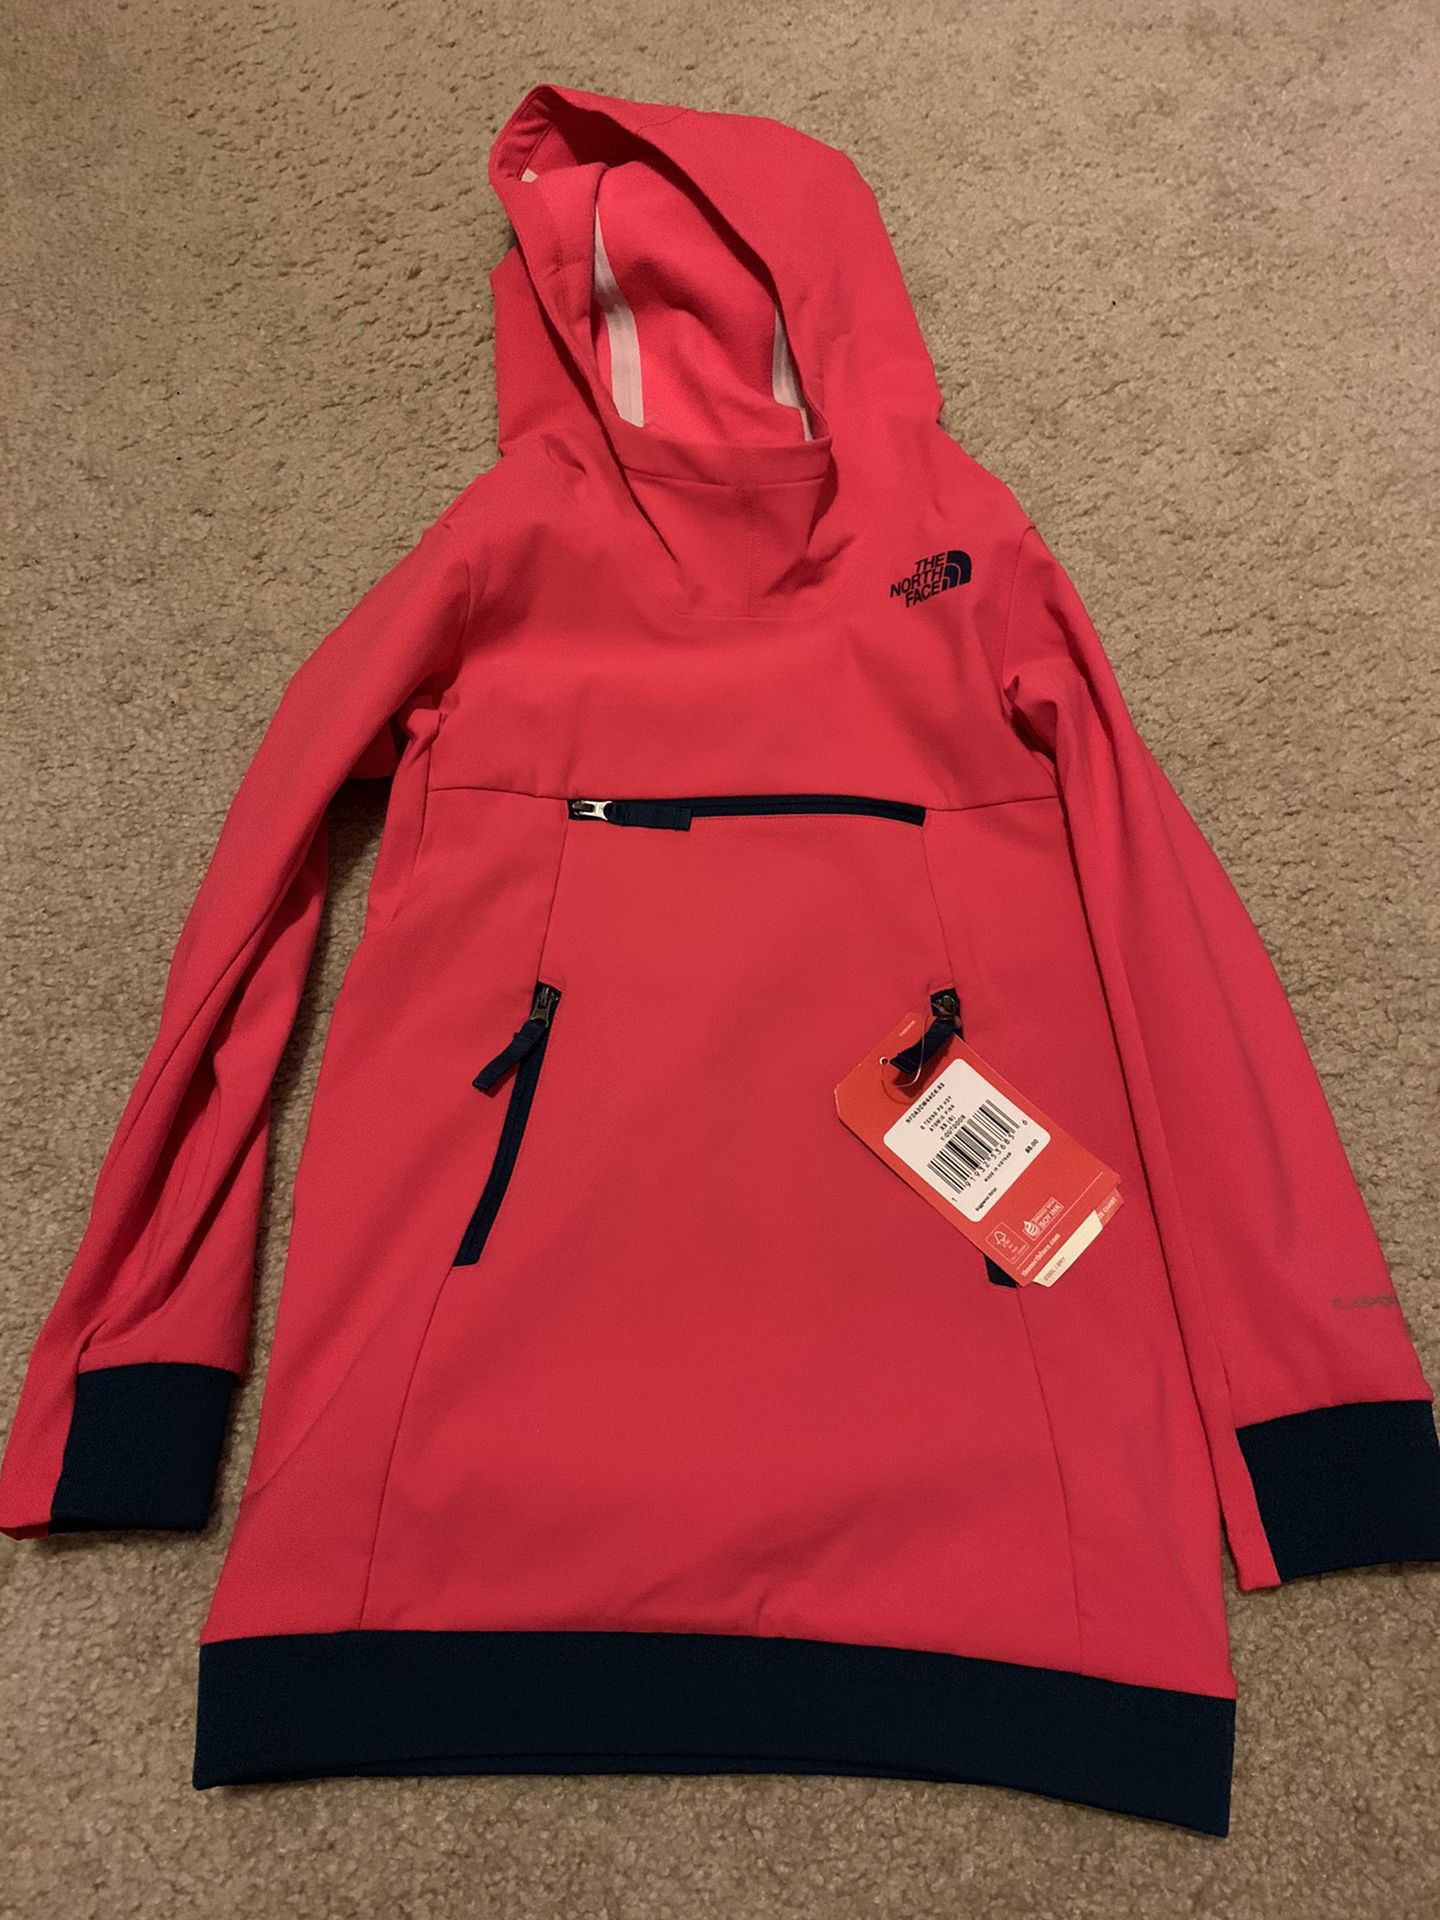 The north face girls atomic pink “hoody”/lightweight jacket size 6